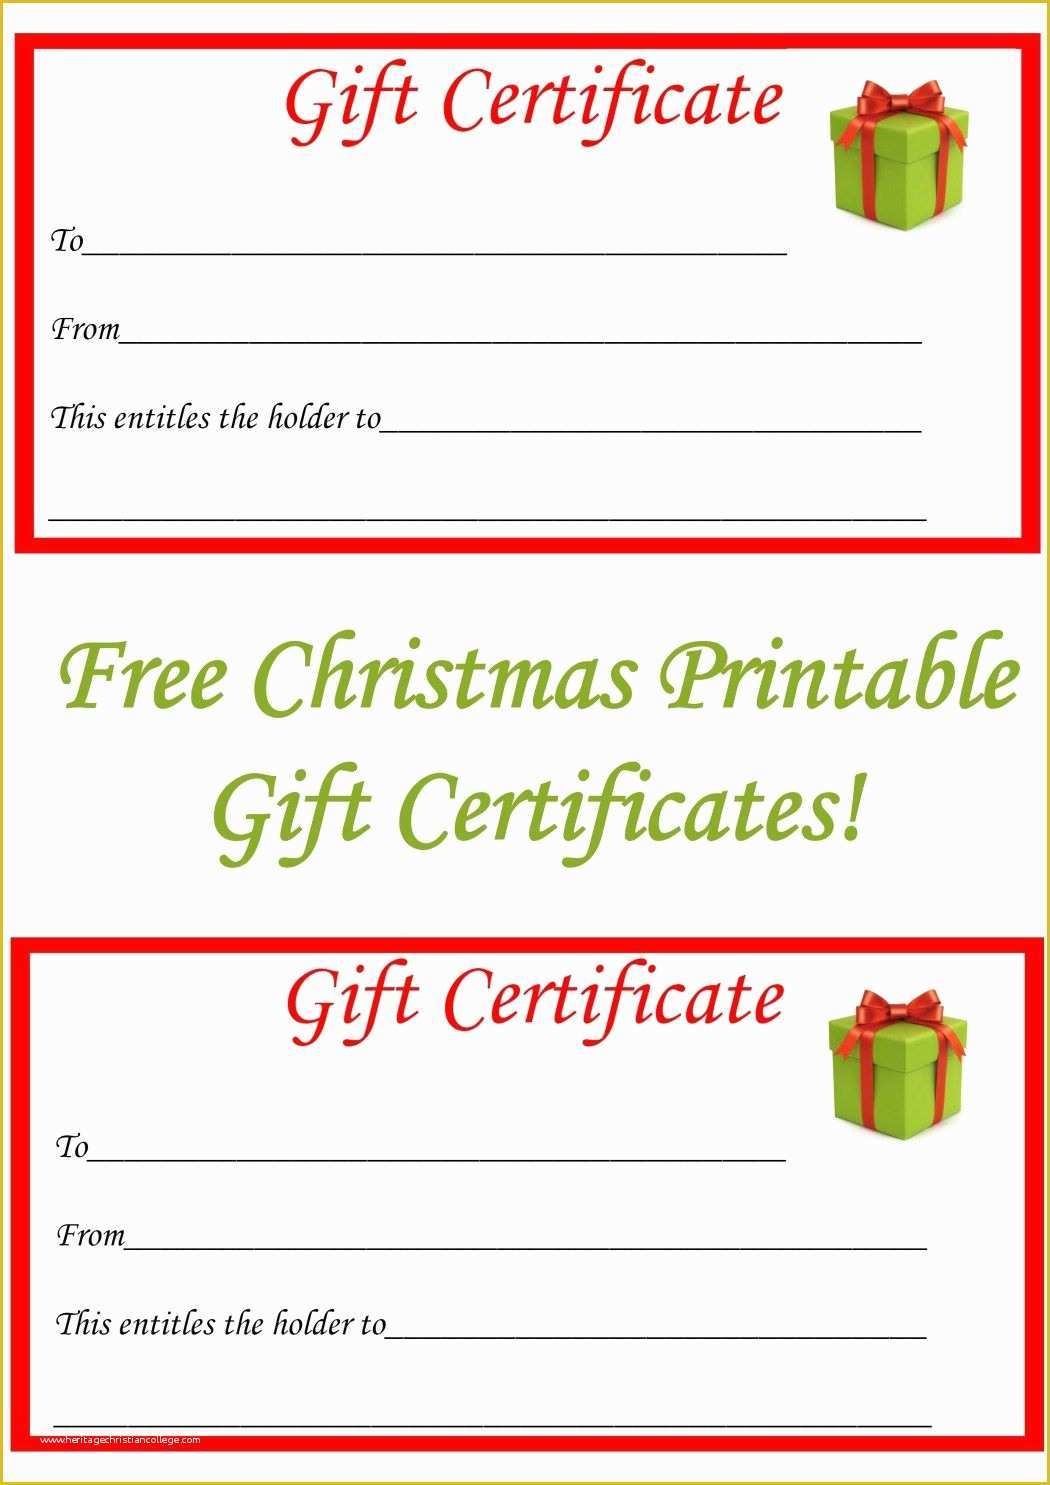 Gift Card Template Free Of Best 25 Printable T Certificates Ideas On Pinterest